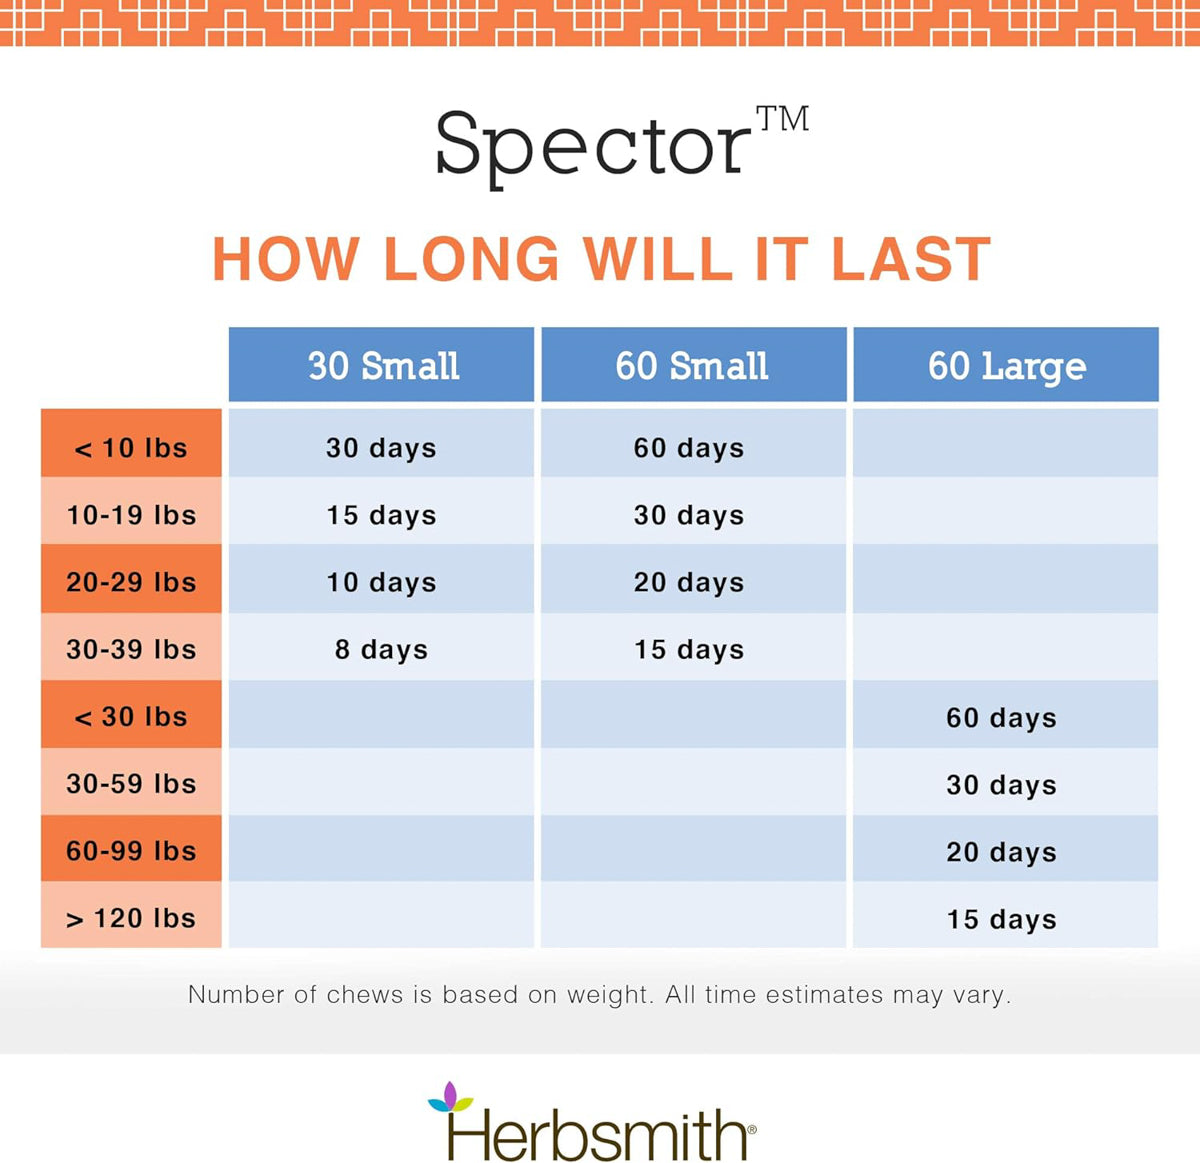 infographic showing how long Spector supplement will last